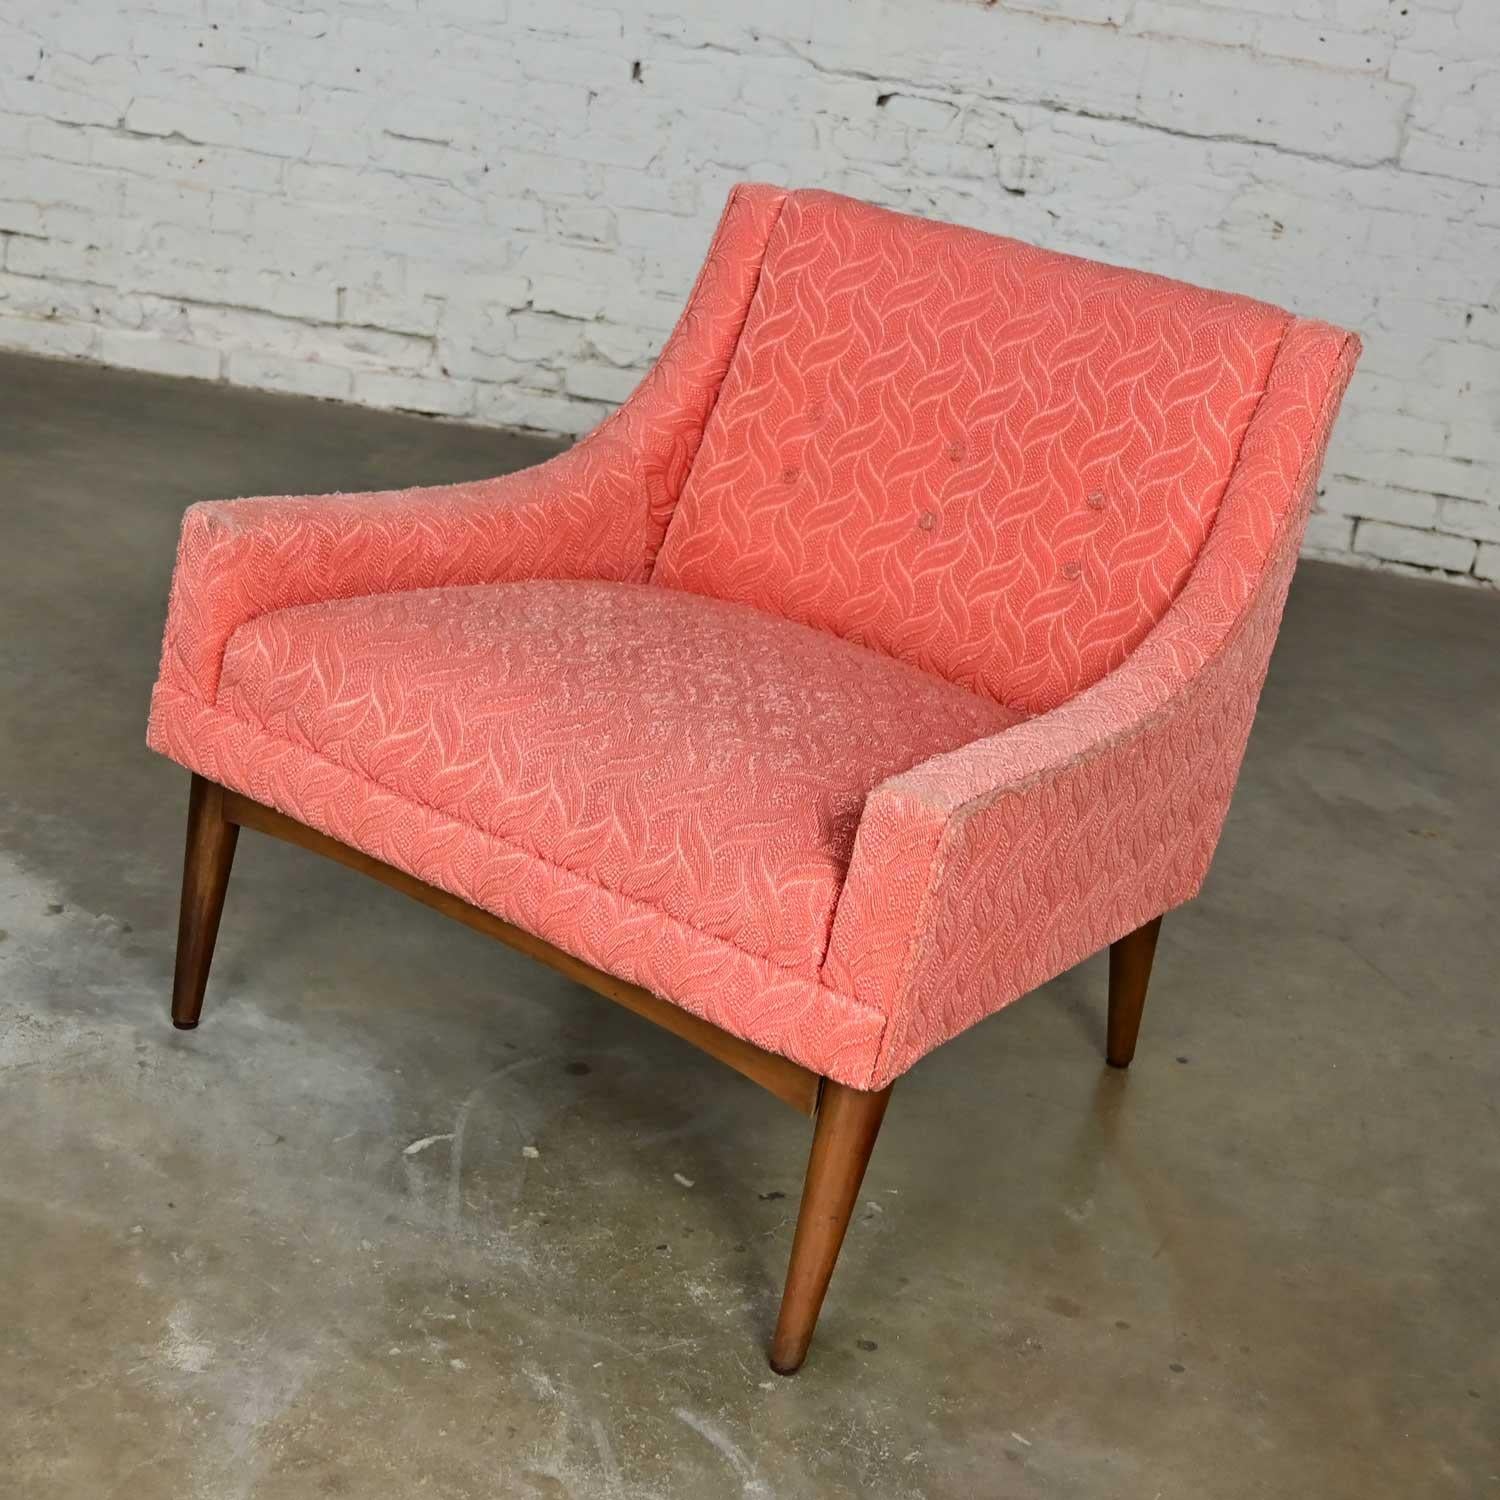 Lovely vintage Mid-Century Modern coral frieze upholstered modified slipper chair with round tapered walnut legs. Beautiful condition, keeping in mind that this is vintage and not new so will have signs of use and wear. The padding in the chair is a